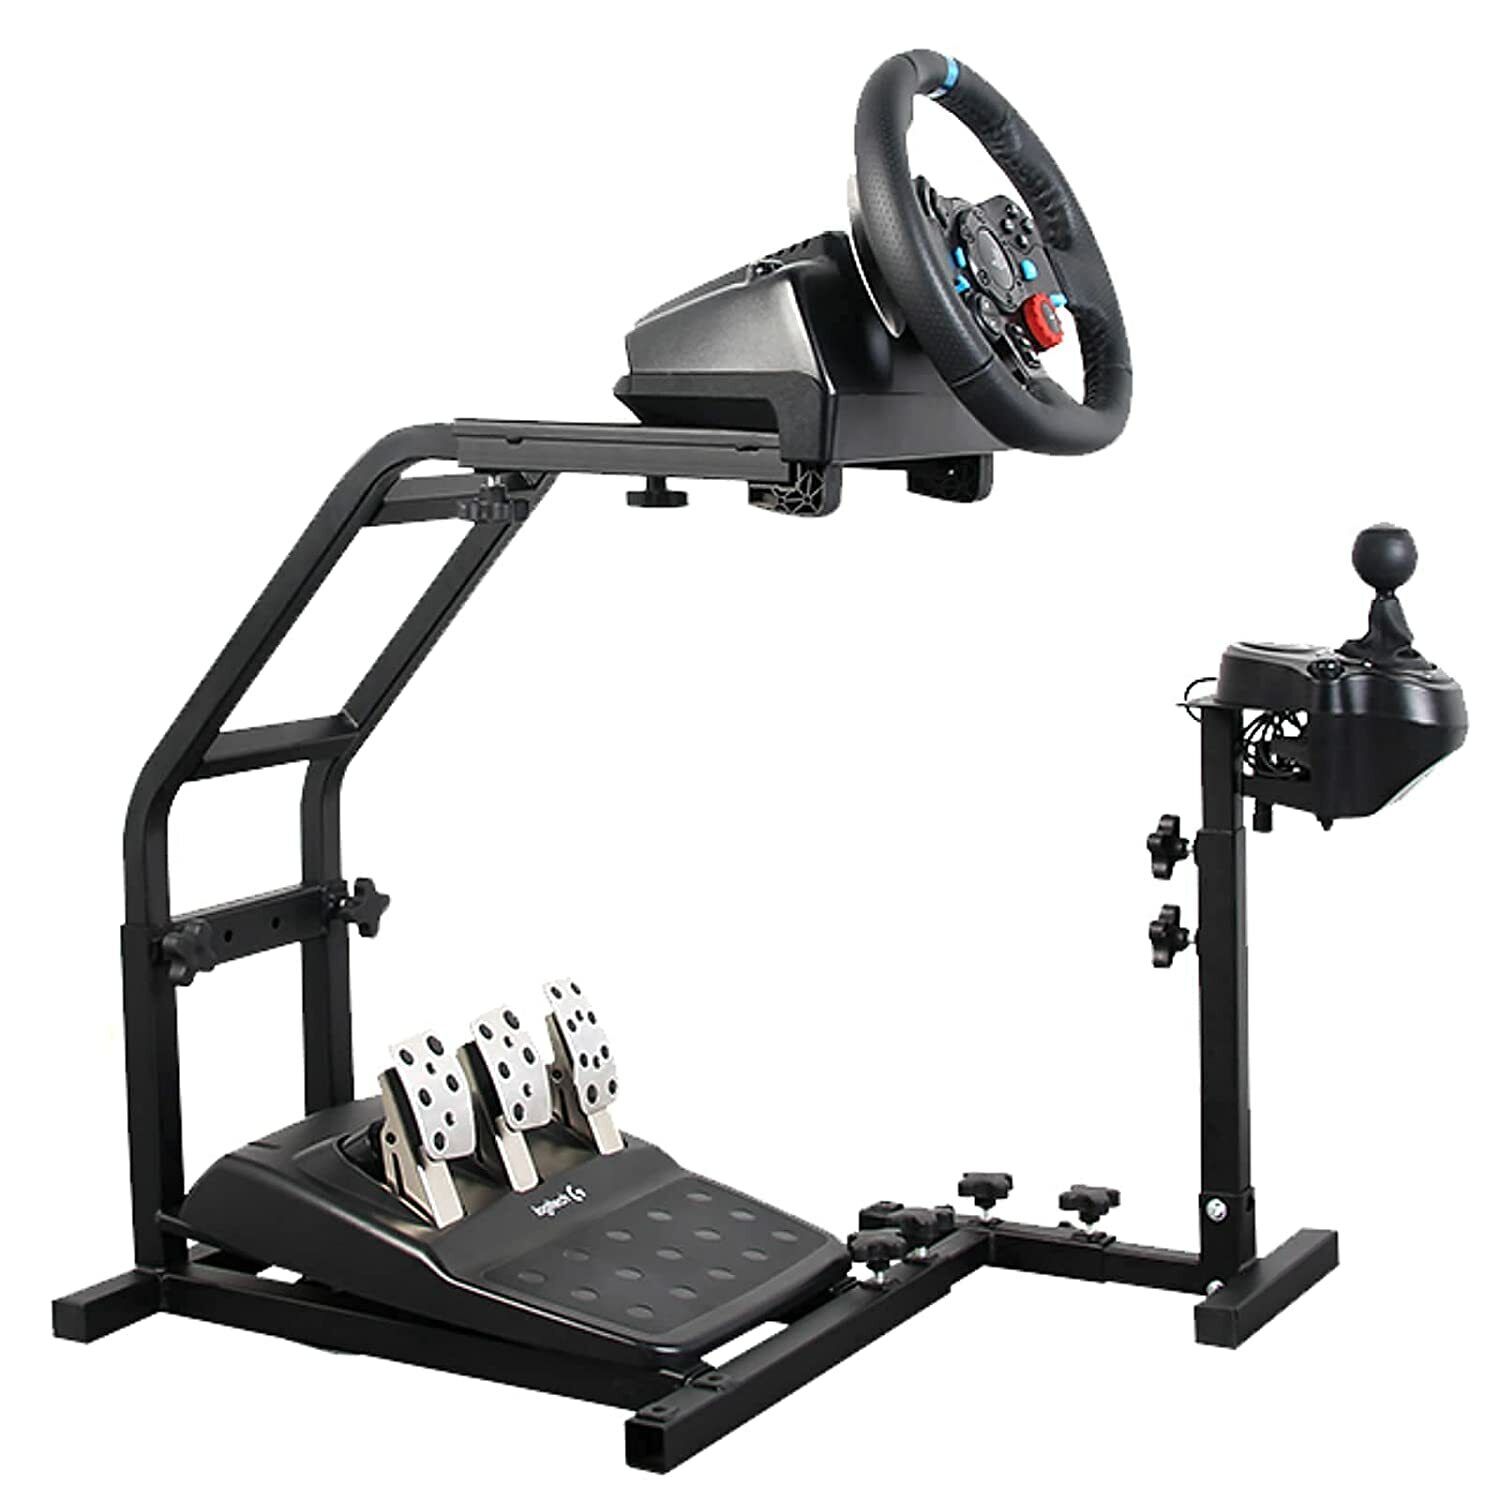 Hottoby G29 Driving Simulator Cockpit Racing Wheel Stand for Logitech G25 G27 G920 Gaming Fame Racing Wheel Shifter Pedals Seat Not Included